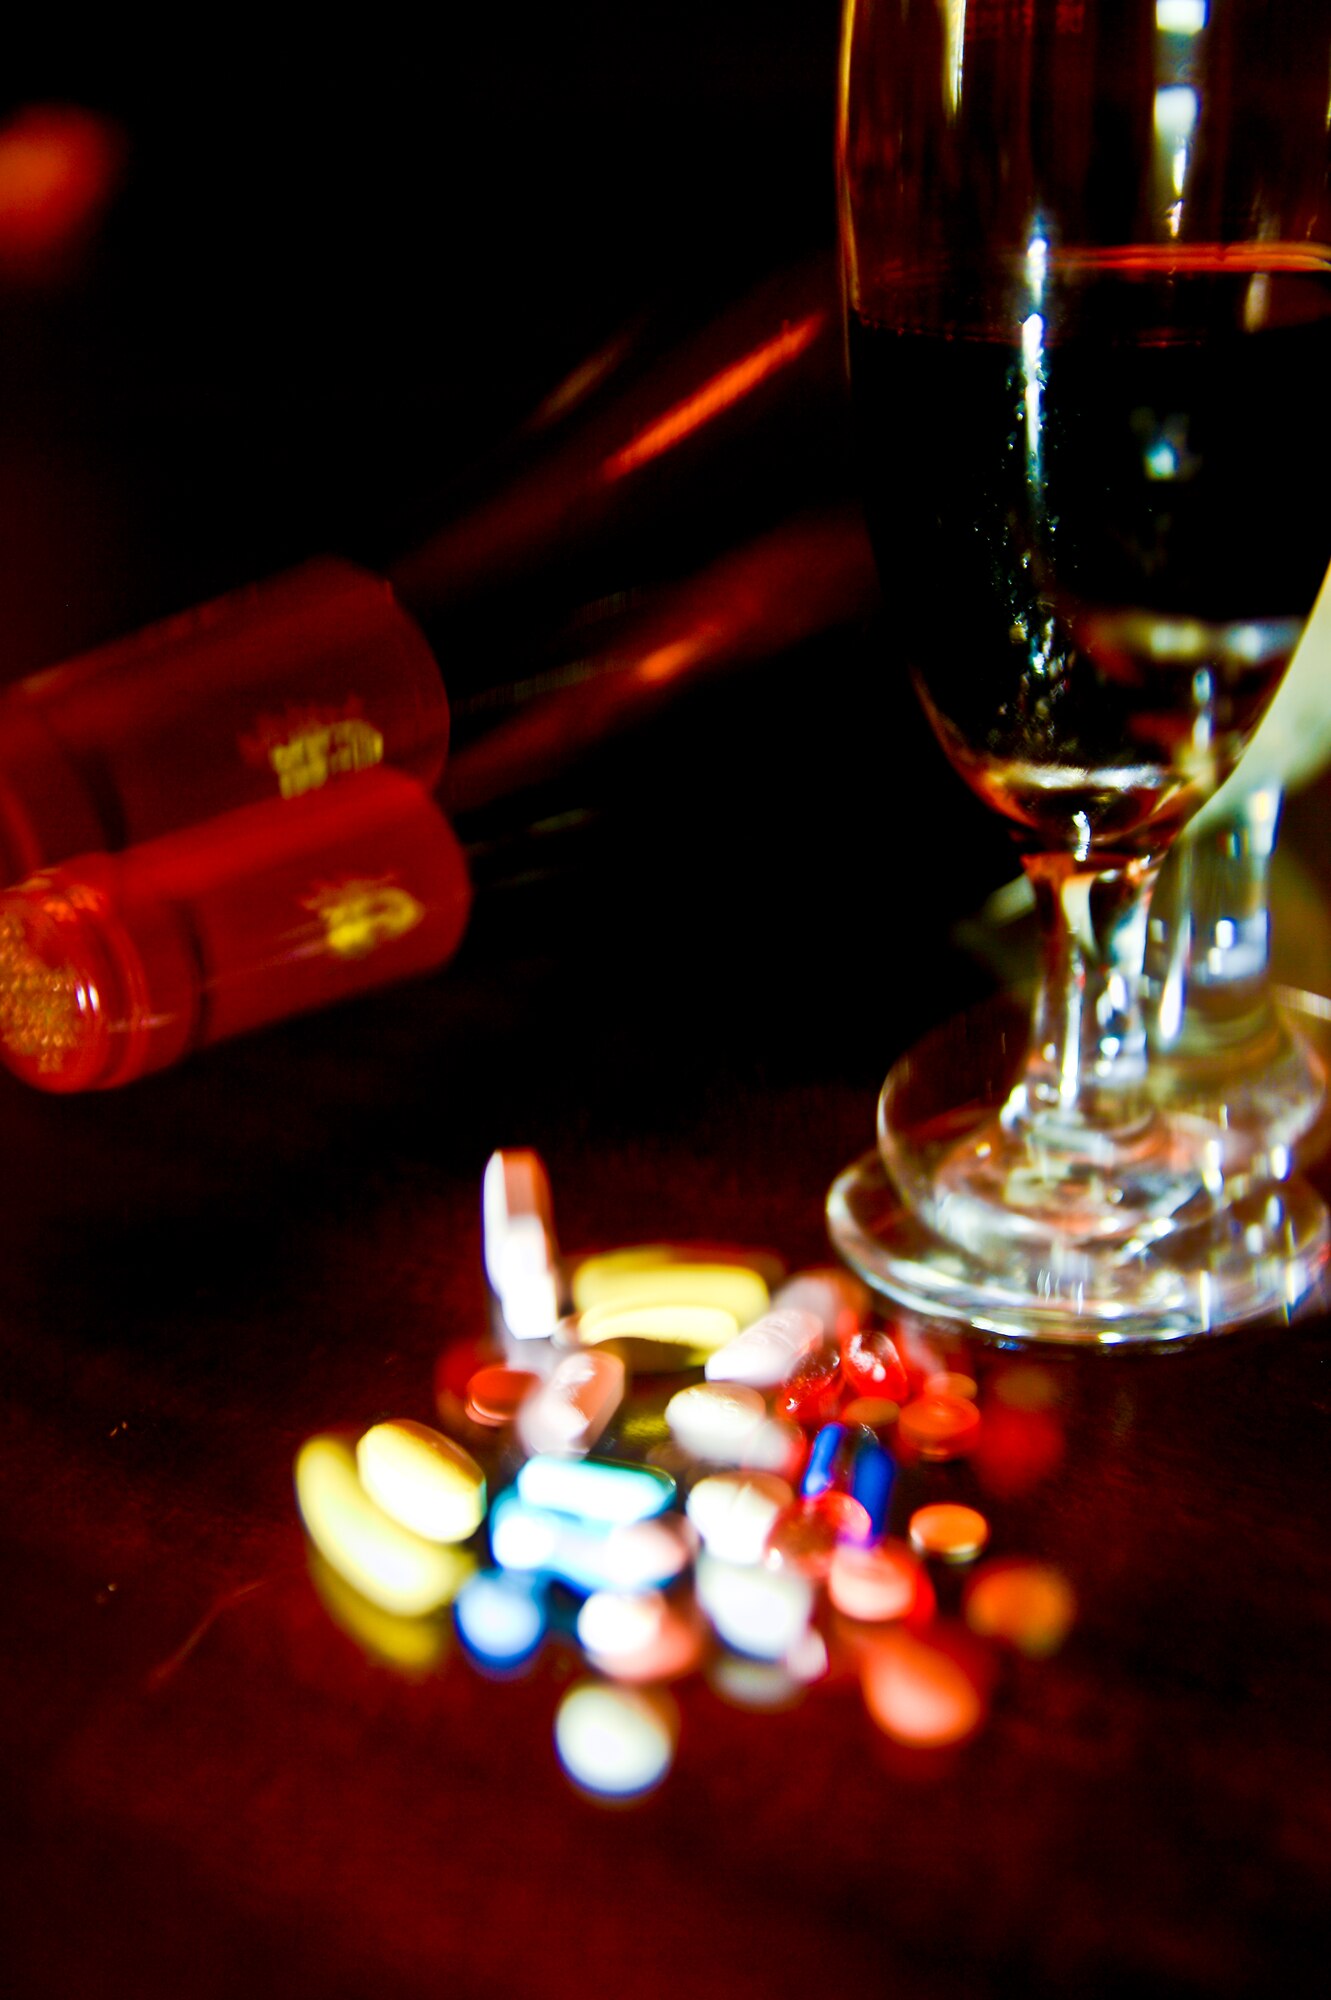 Understanding the signs and symptoms of substance abuse is one of the many integral ways we accomplish the “Wingman” ideology and make sure our brothers and sisters are stable. Whether it be alcohol, illegal substances, or prescription medication abuse, we must be well versed in recognizing the signs, knowing how to counsel and identifying when to refer. (U.S. Air Force photo illustration by Staff Sgt. Brandon Shapiro/Released)